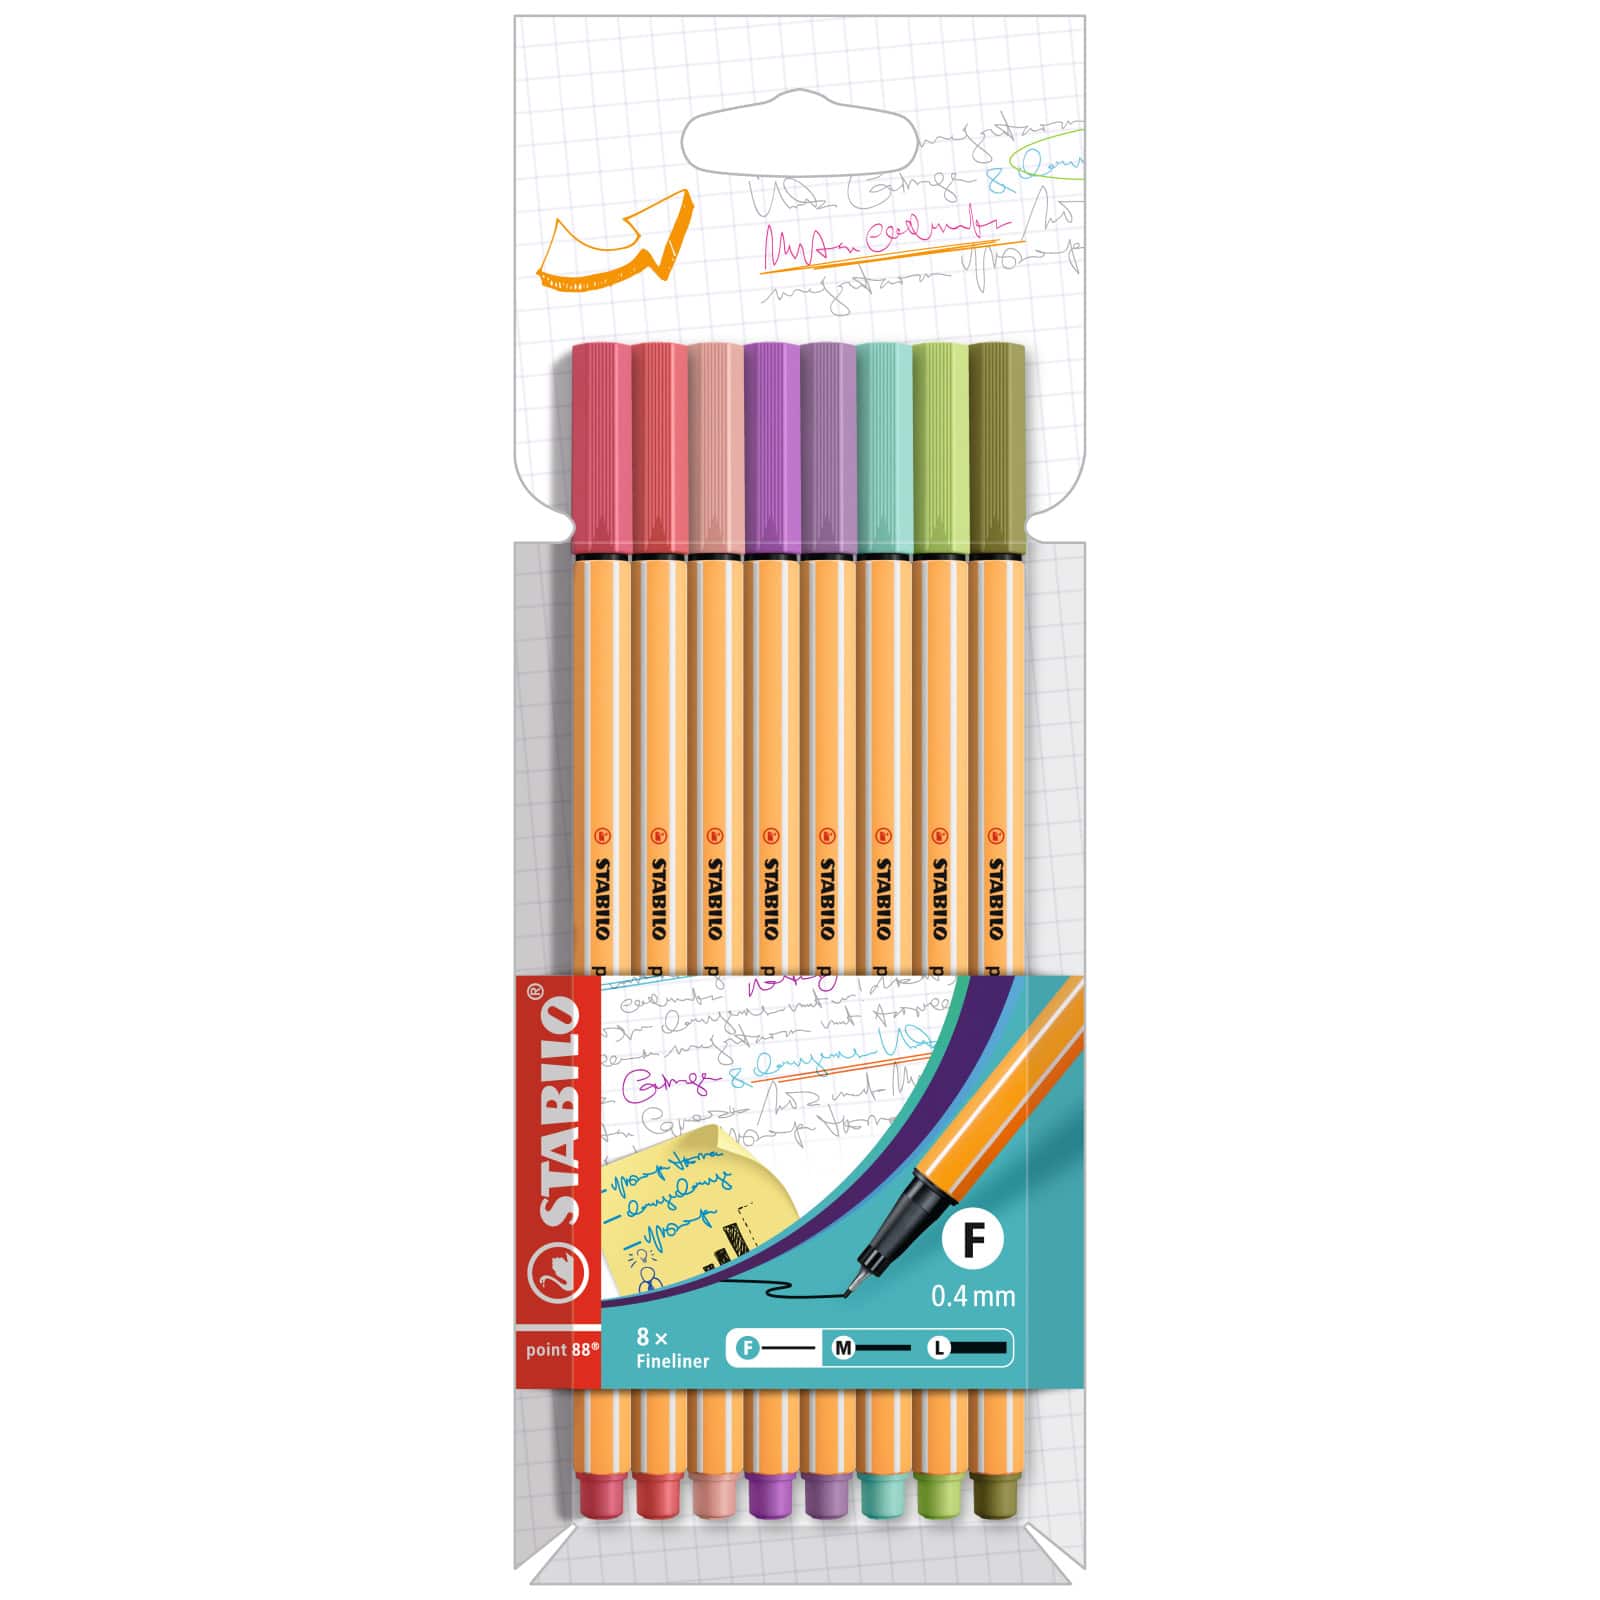 Stabilo Point 88 Fineliner Wallet of 8 Assorted Pastel Colours 88/8-01 